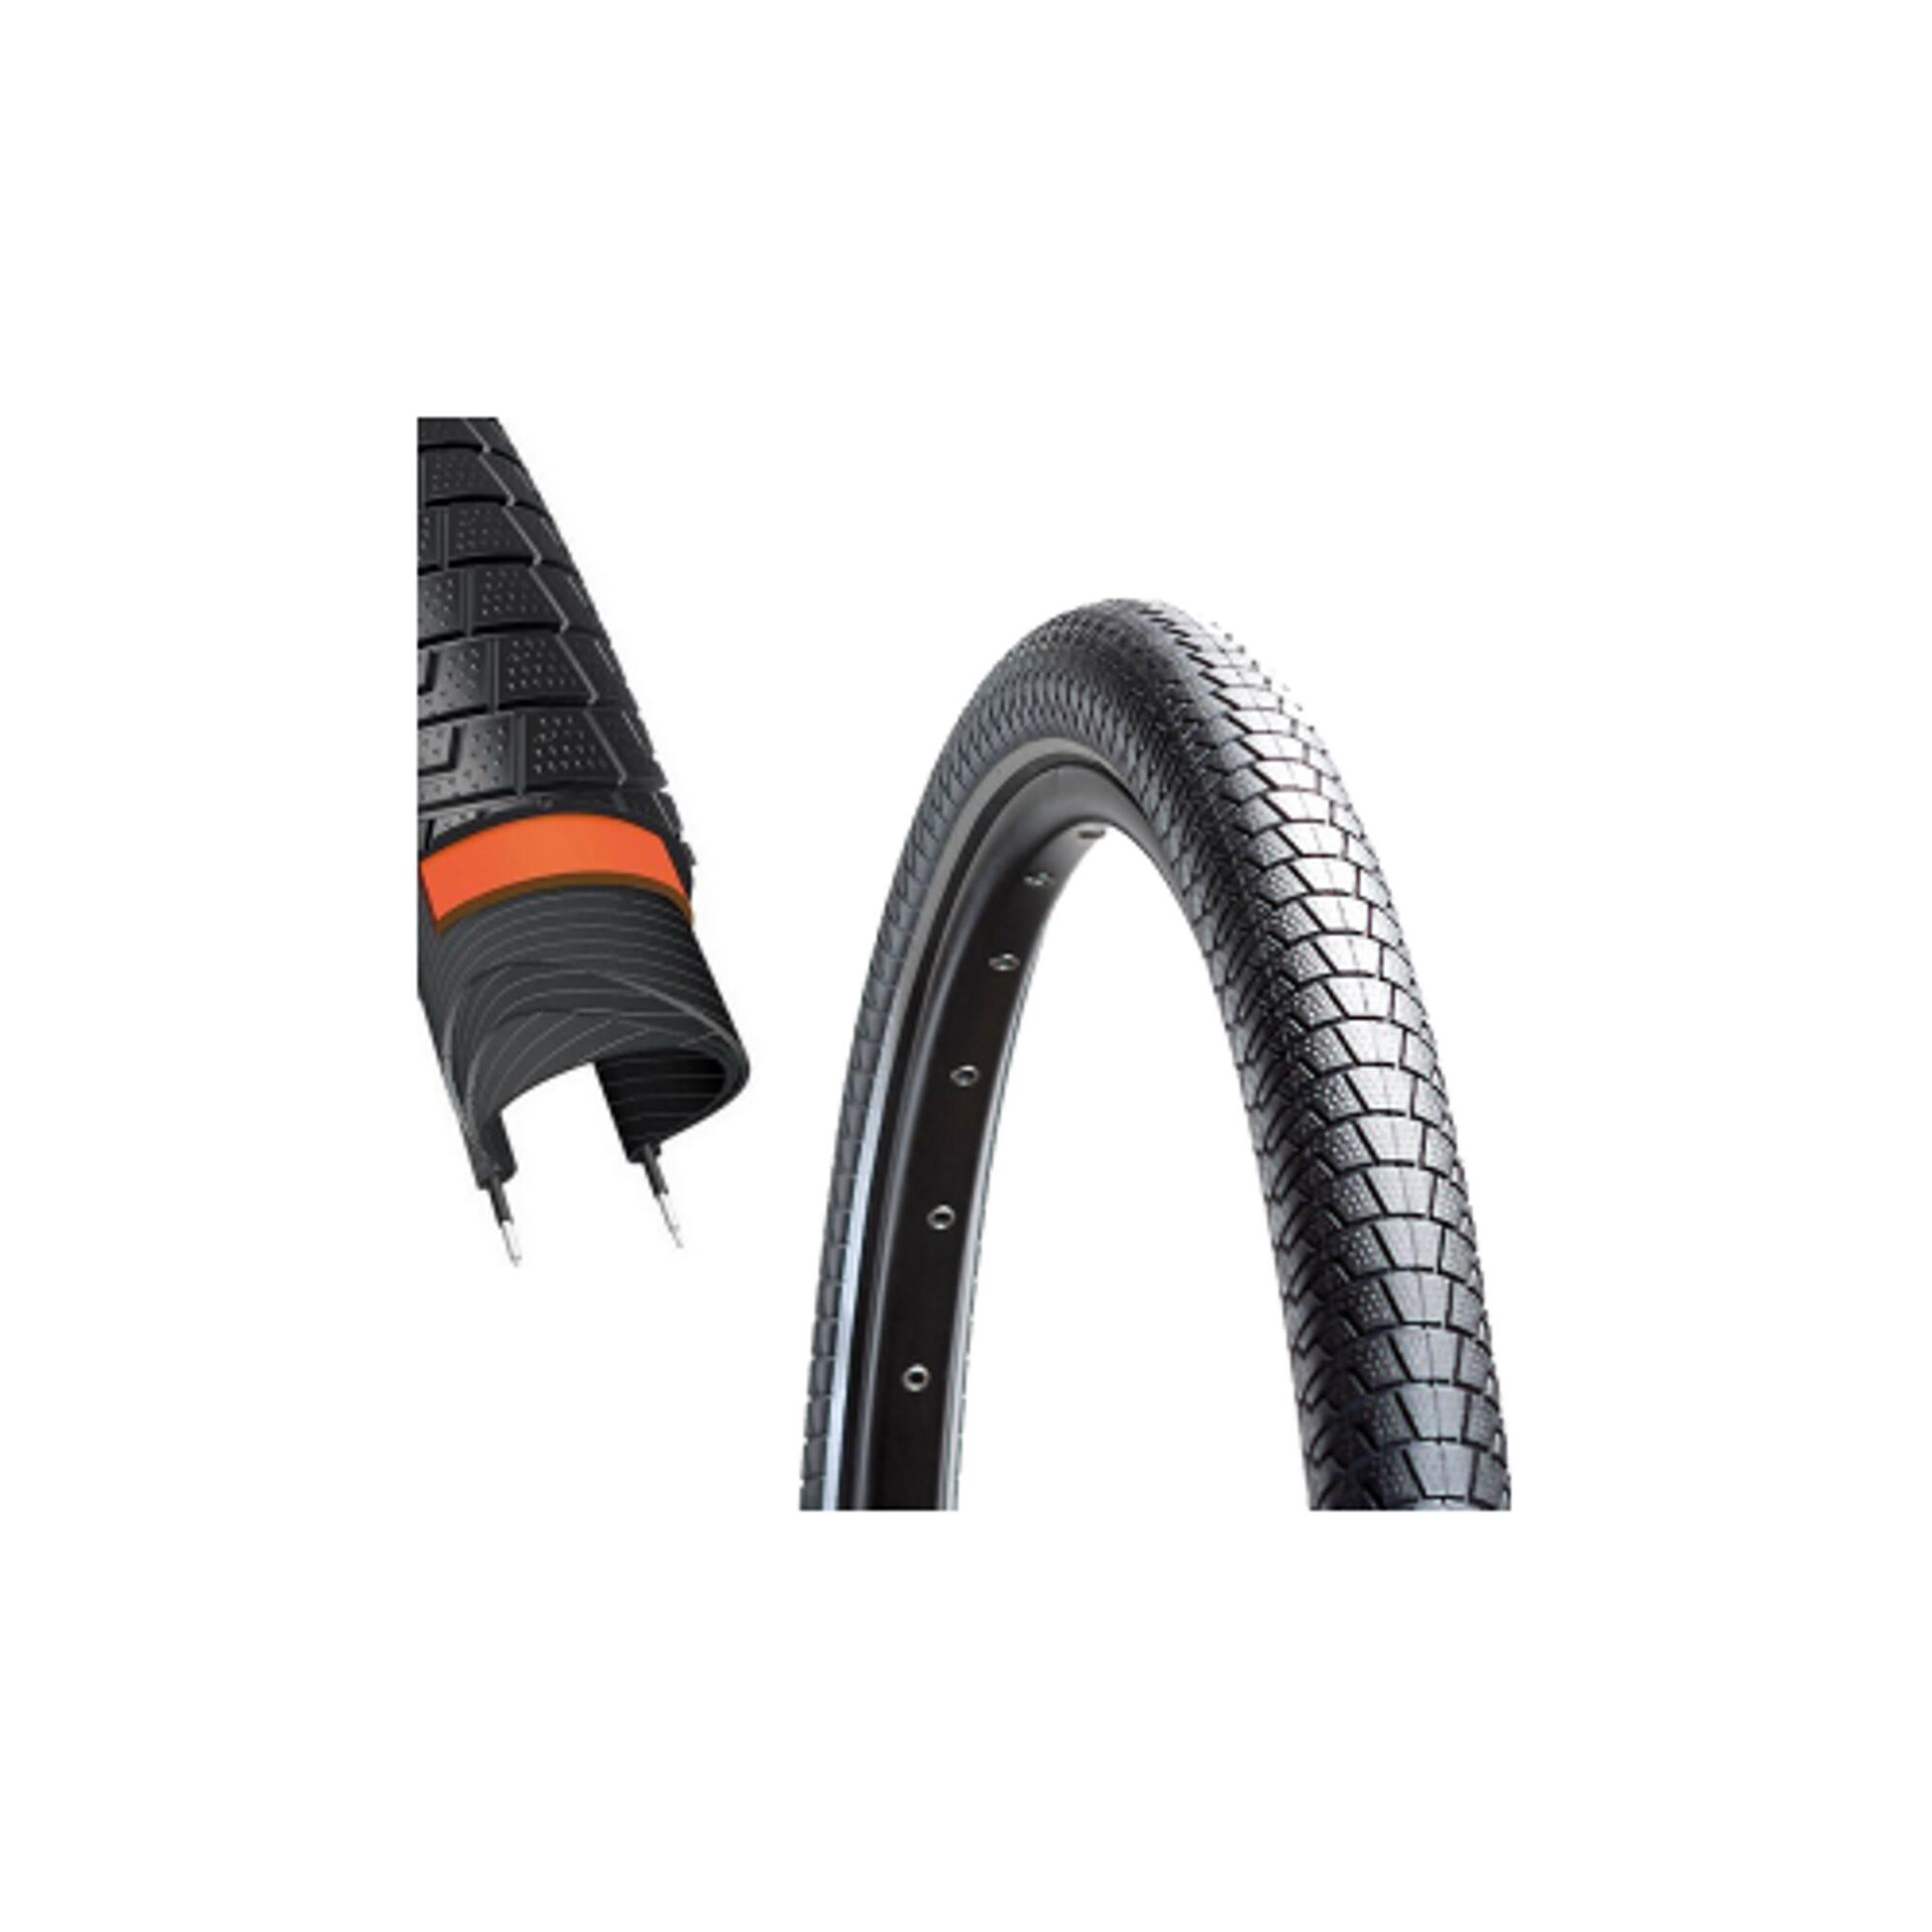 Tyre Cargo C1996 CST Brooklyn Pro 20"*2.15 55-406 For Longtail R500 Cargo Bike 1/2